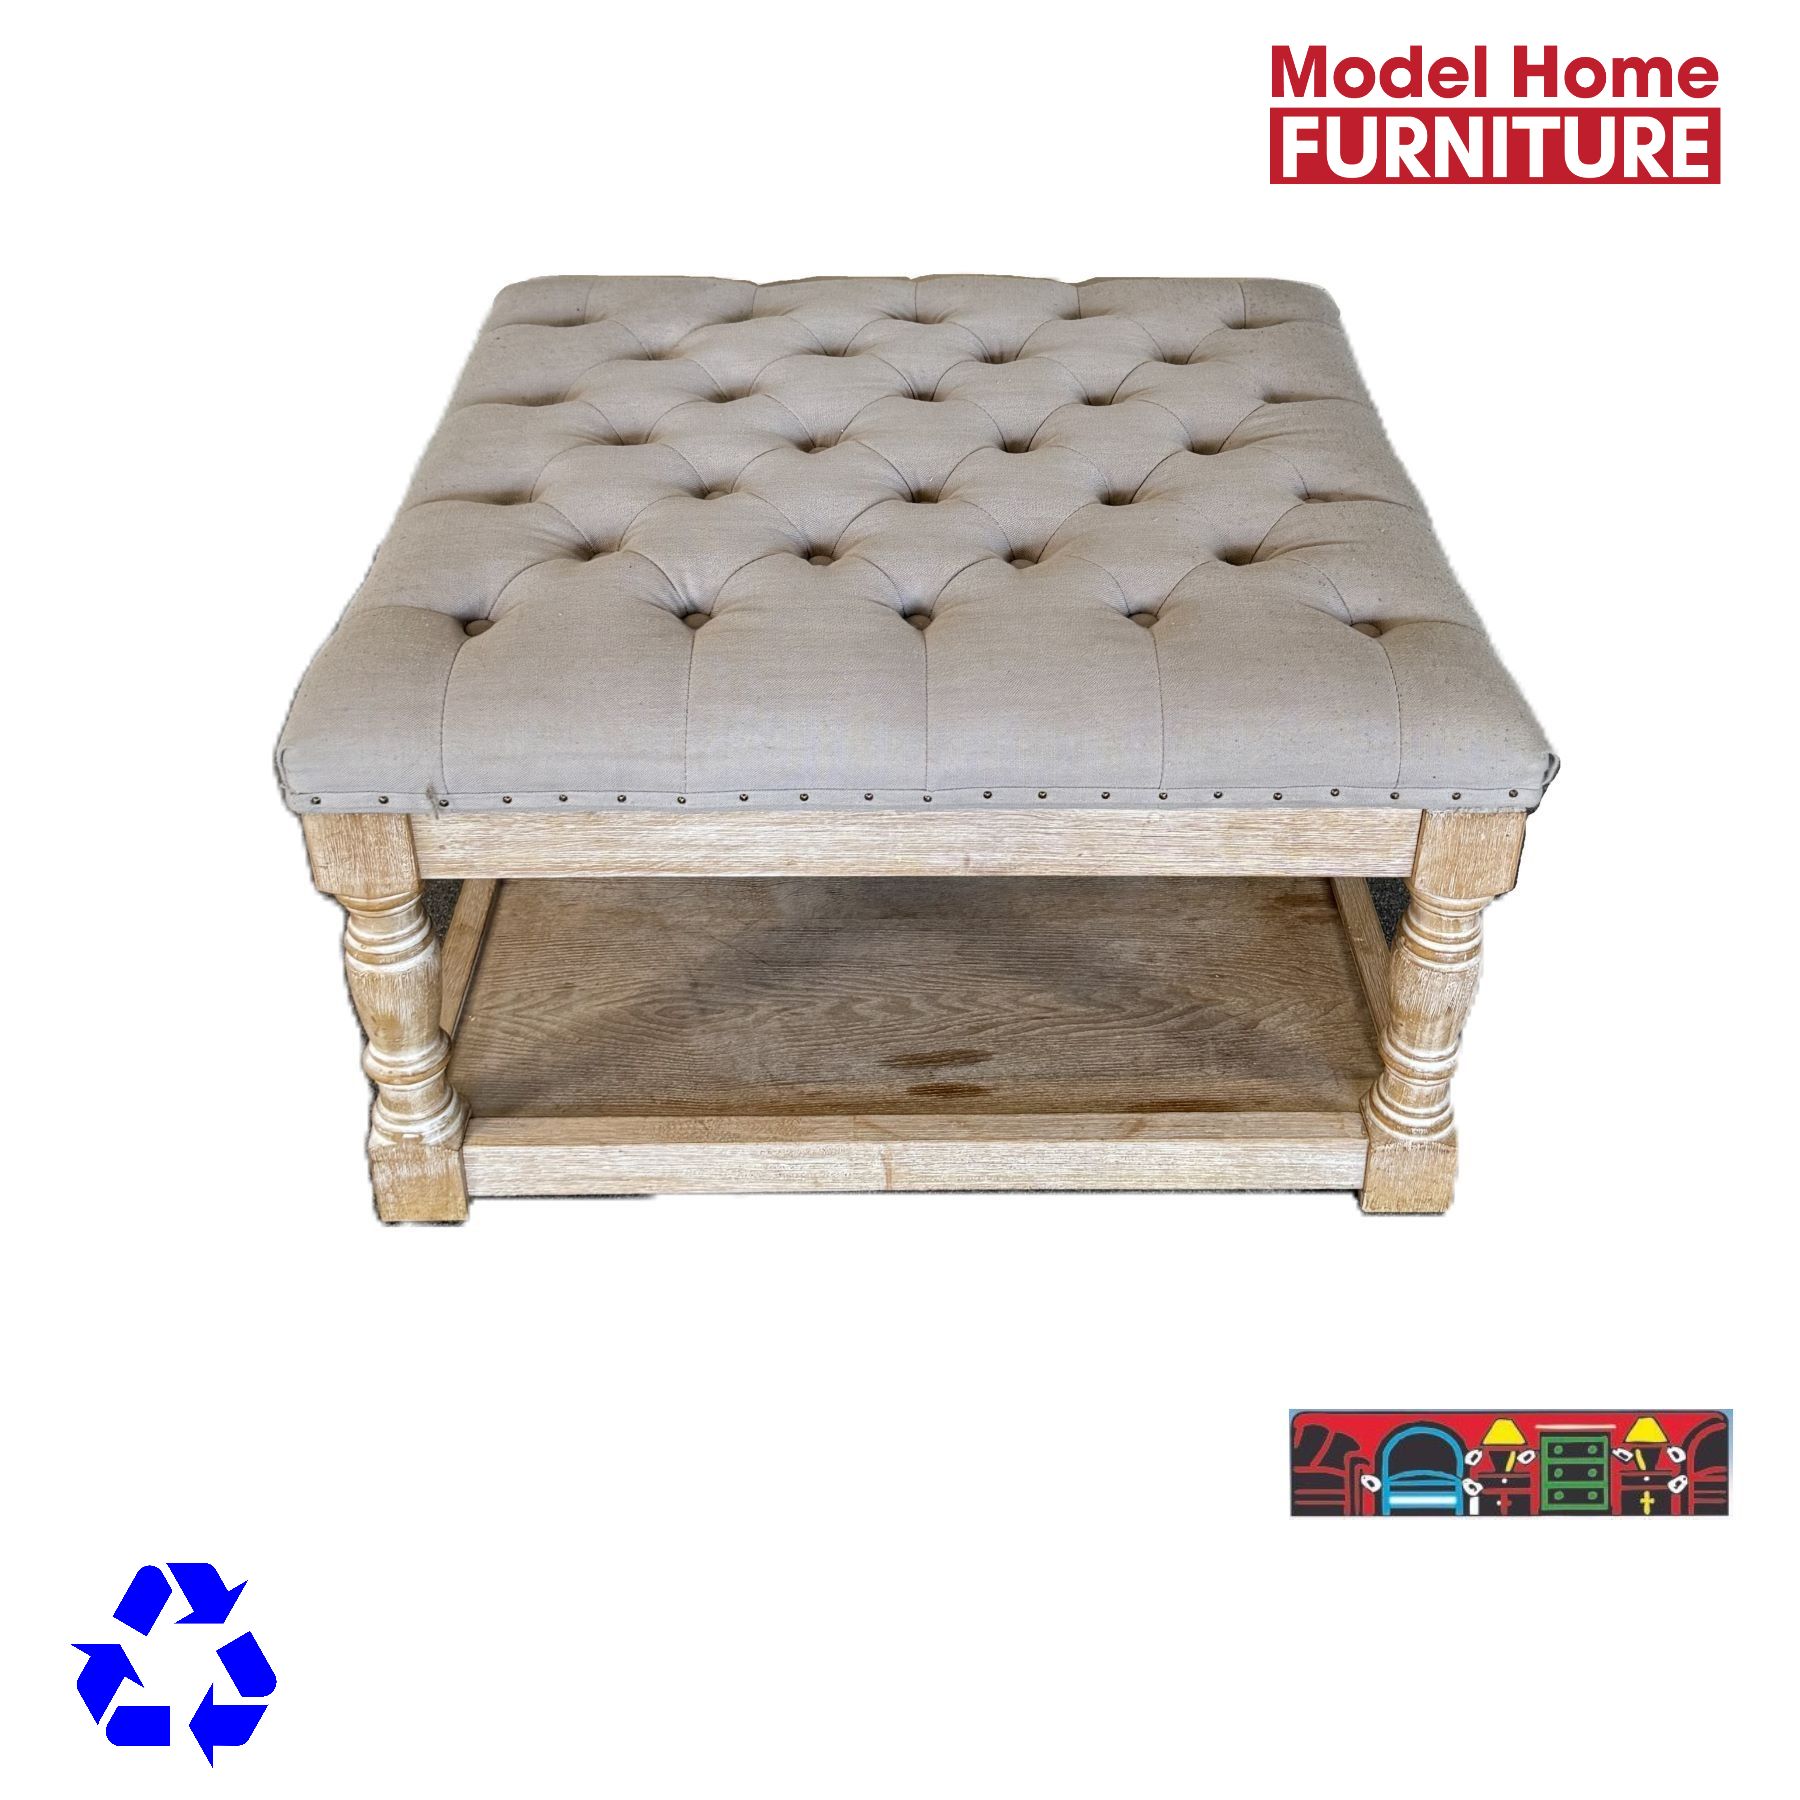 Ottoman cocktail table with a wooden frame in distressed sand color and a tufted grey top is available at Bratz-CFW in Fort Myers, FL.